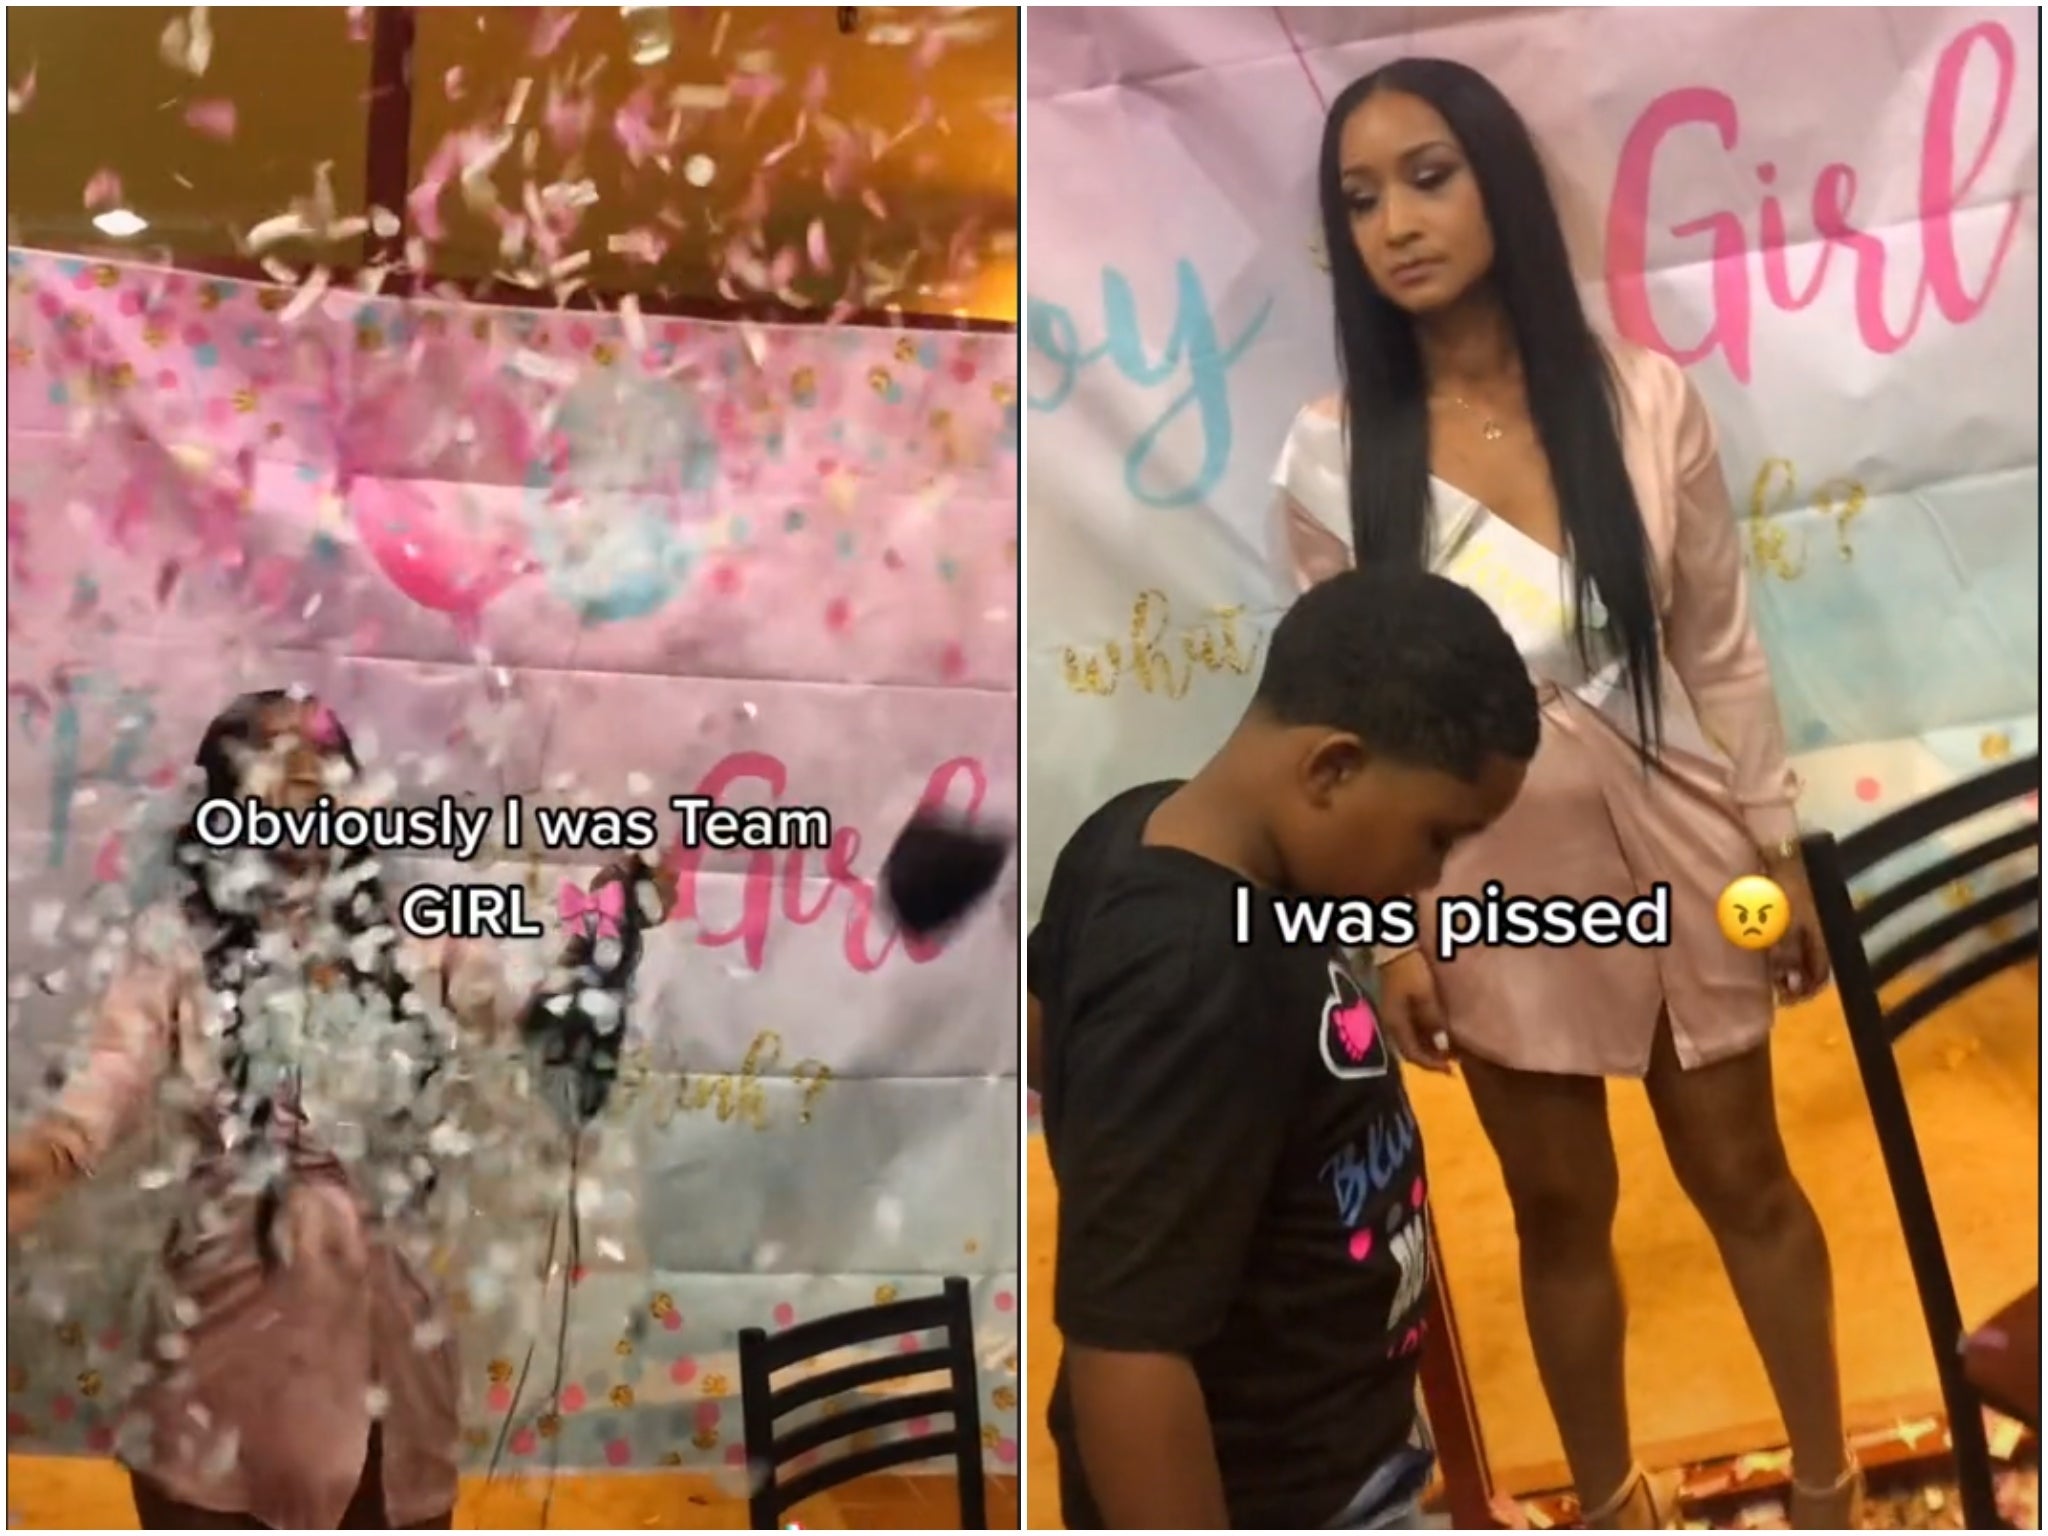 TikTok user Ashlee shares the moment her gender reveal party was ruined